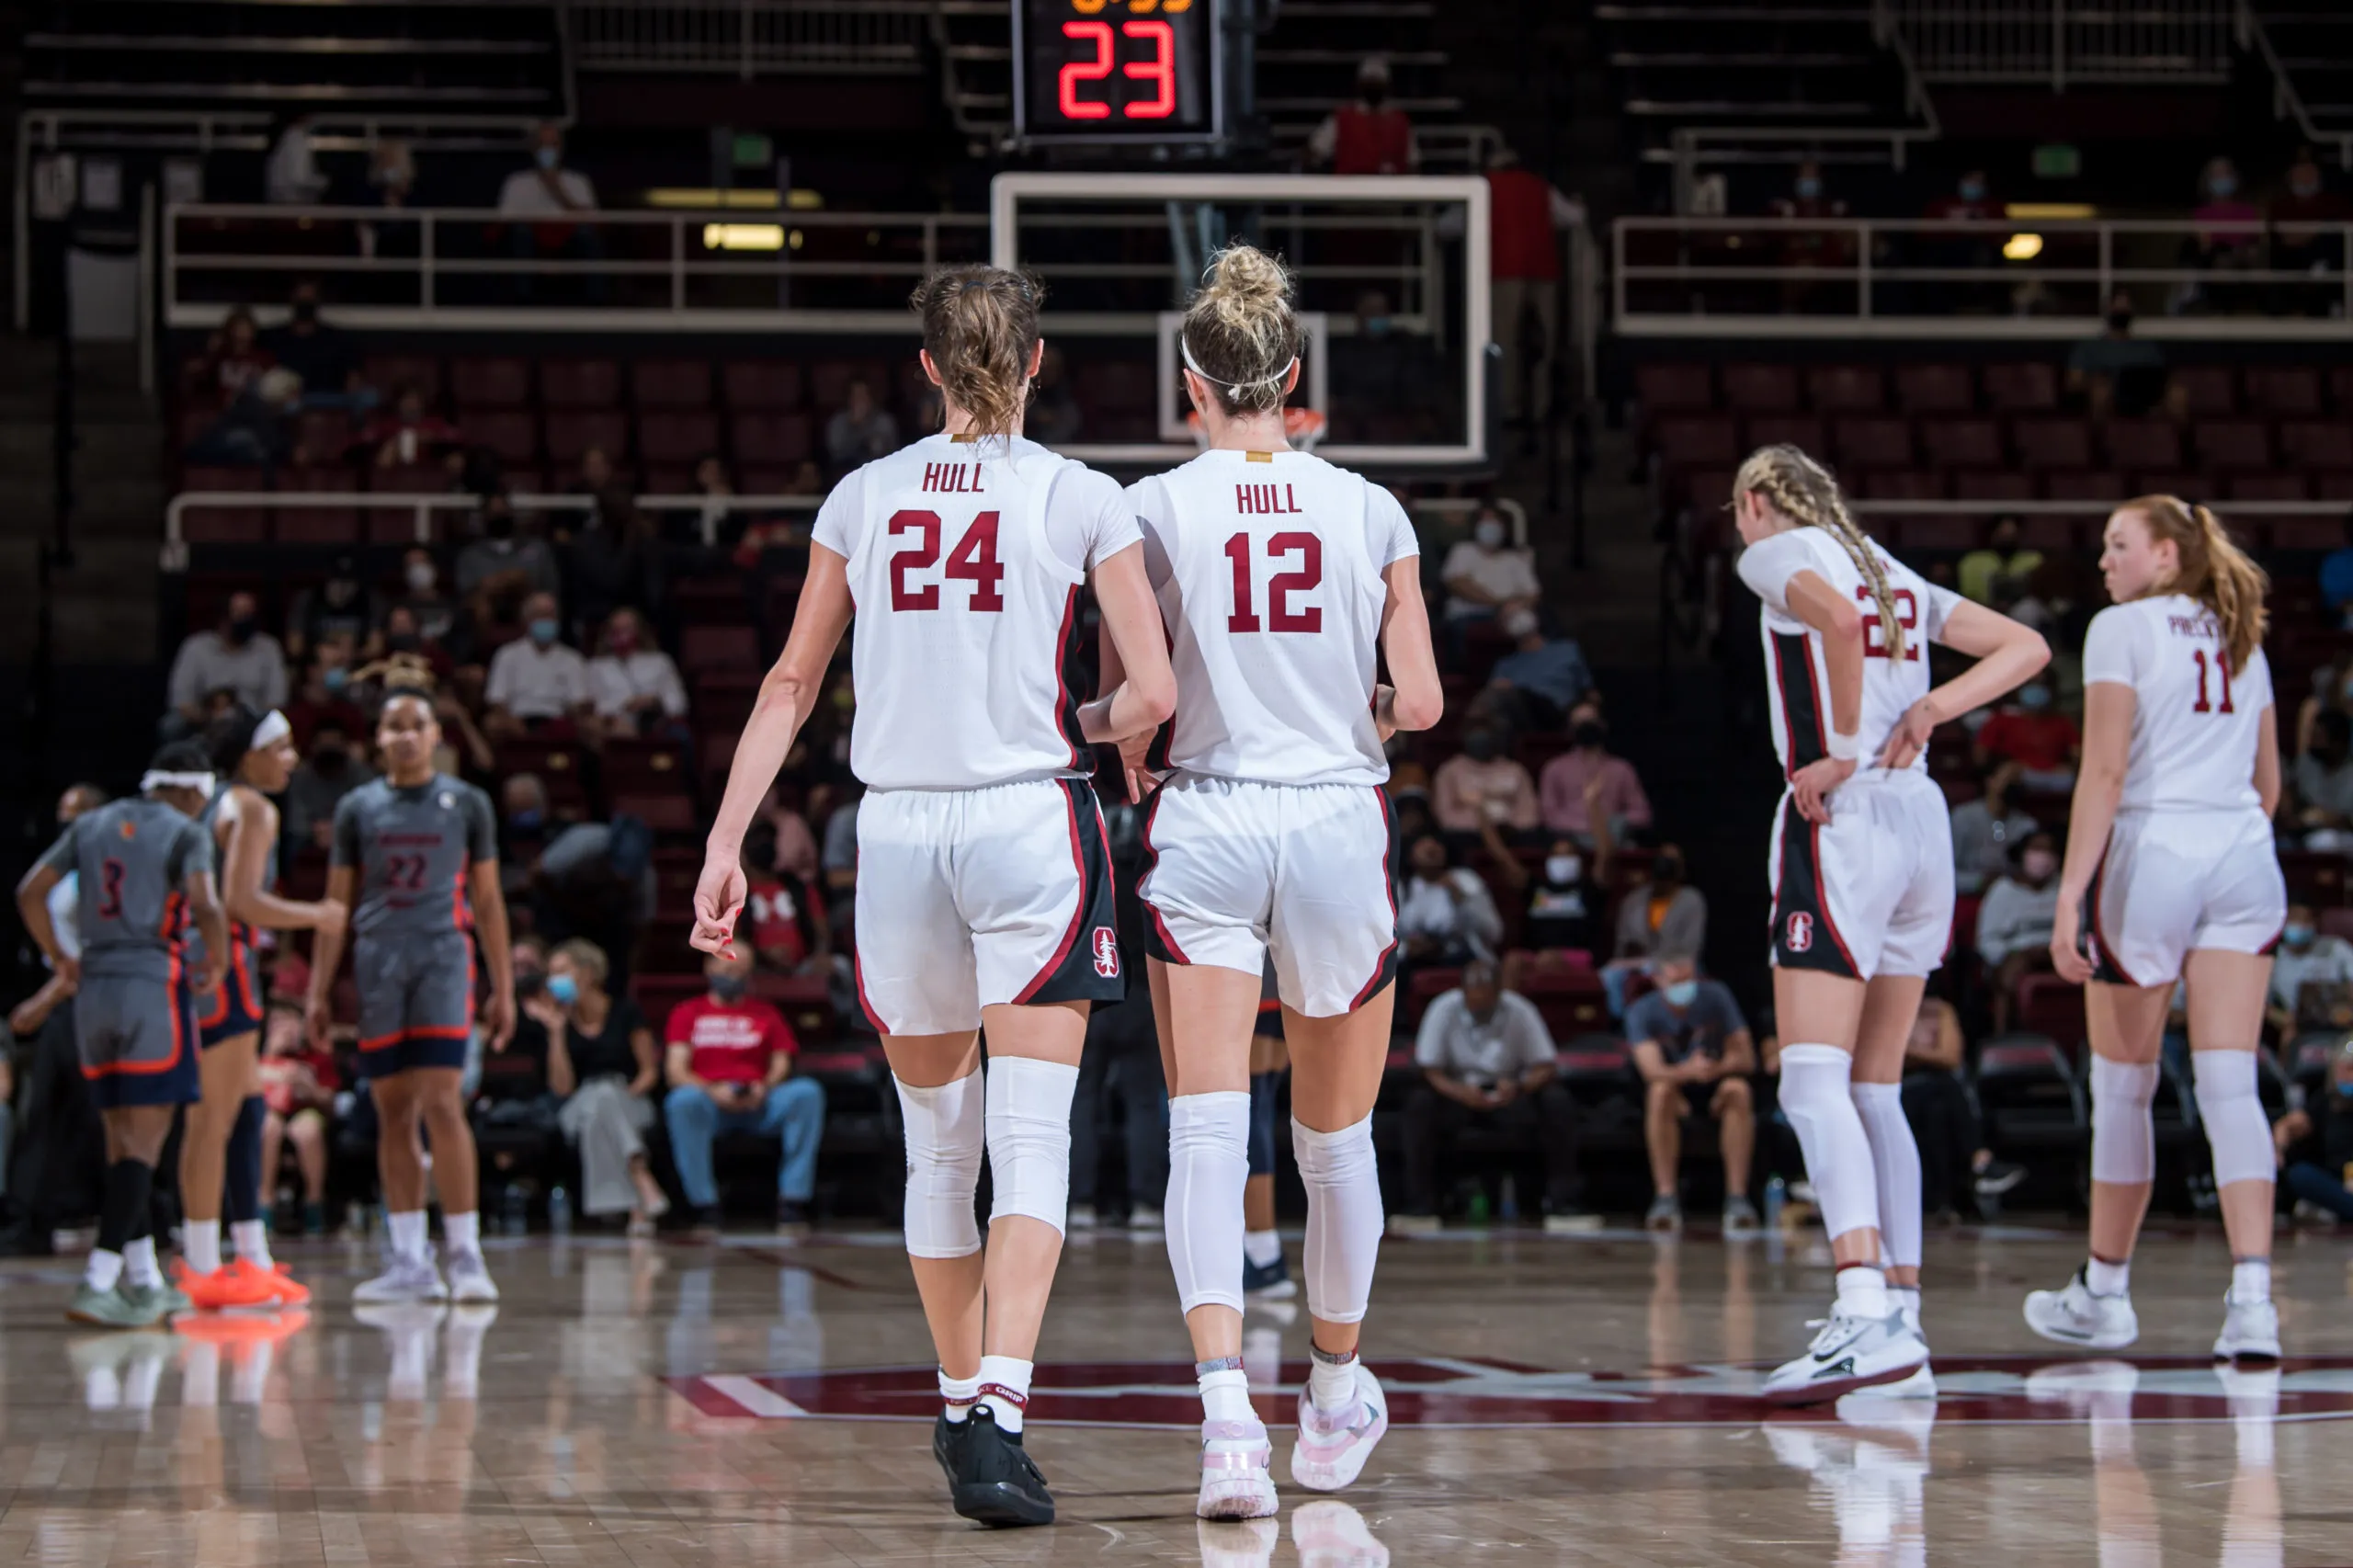 Twin geniuses Hull sisters shine at Stanford women’s basketball